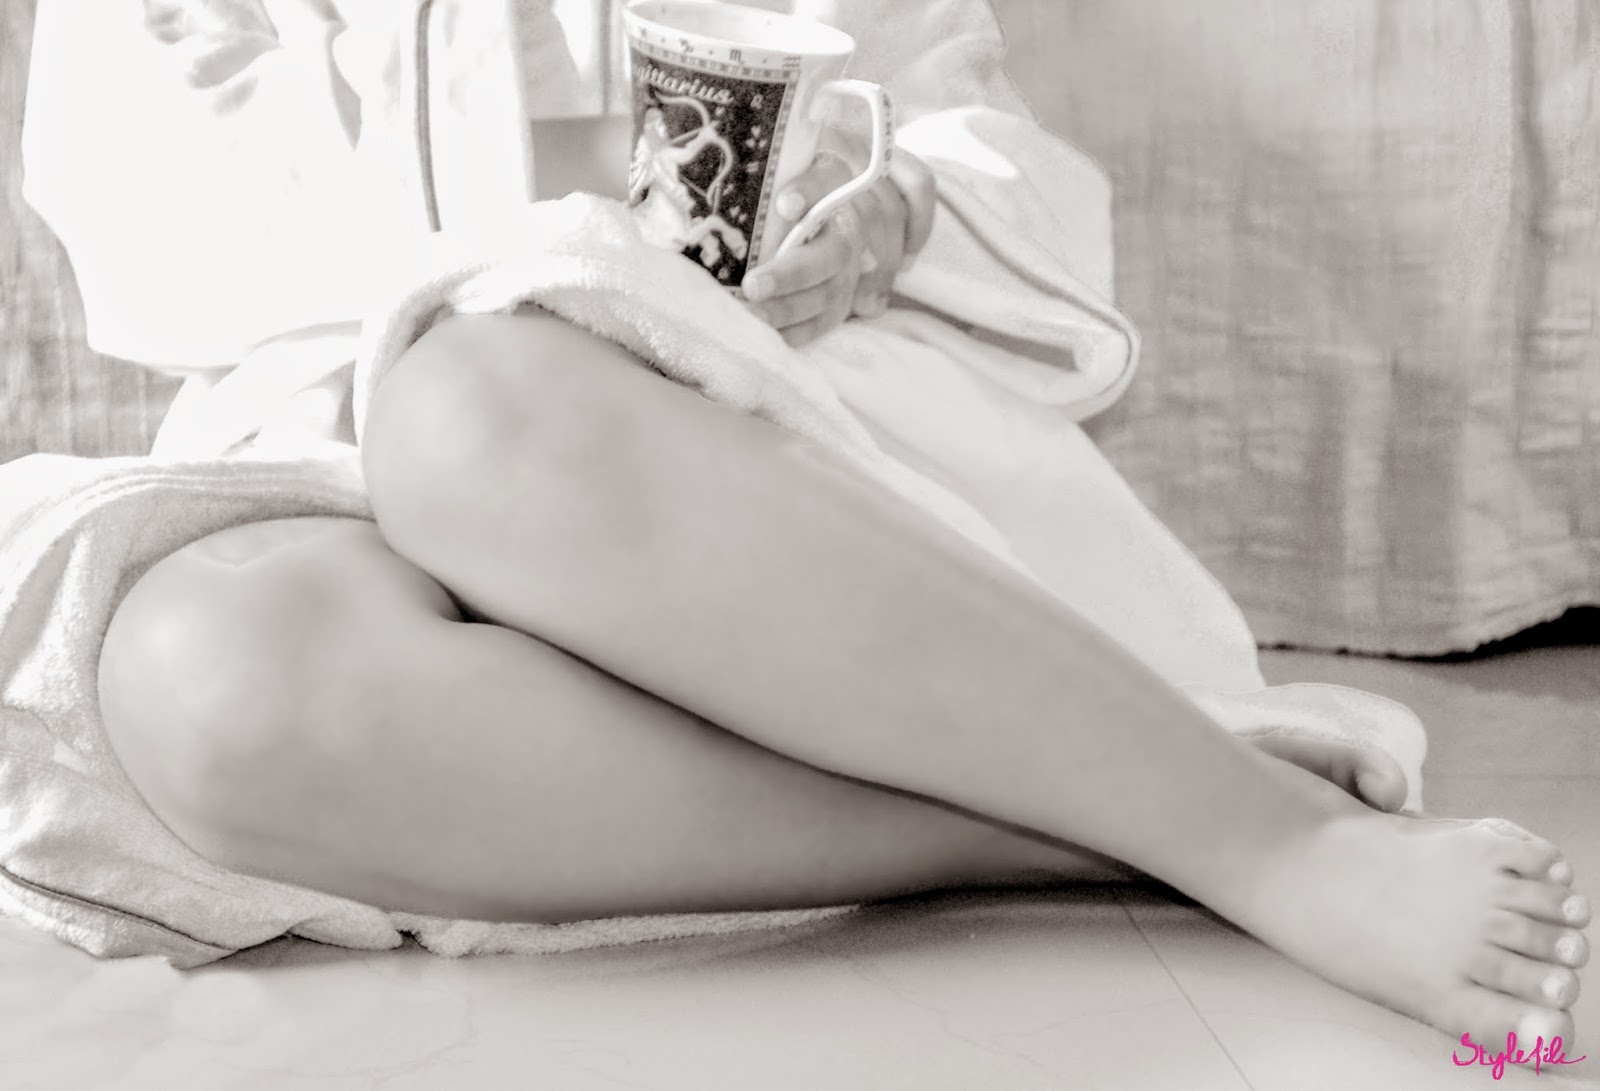 Dayle Pereira of Style File India shoots a series of black and white pictures of her legs while wearing a bathrobe and holding a mug